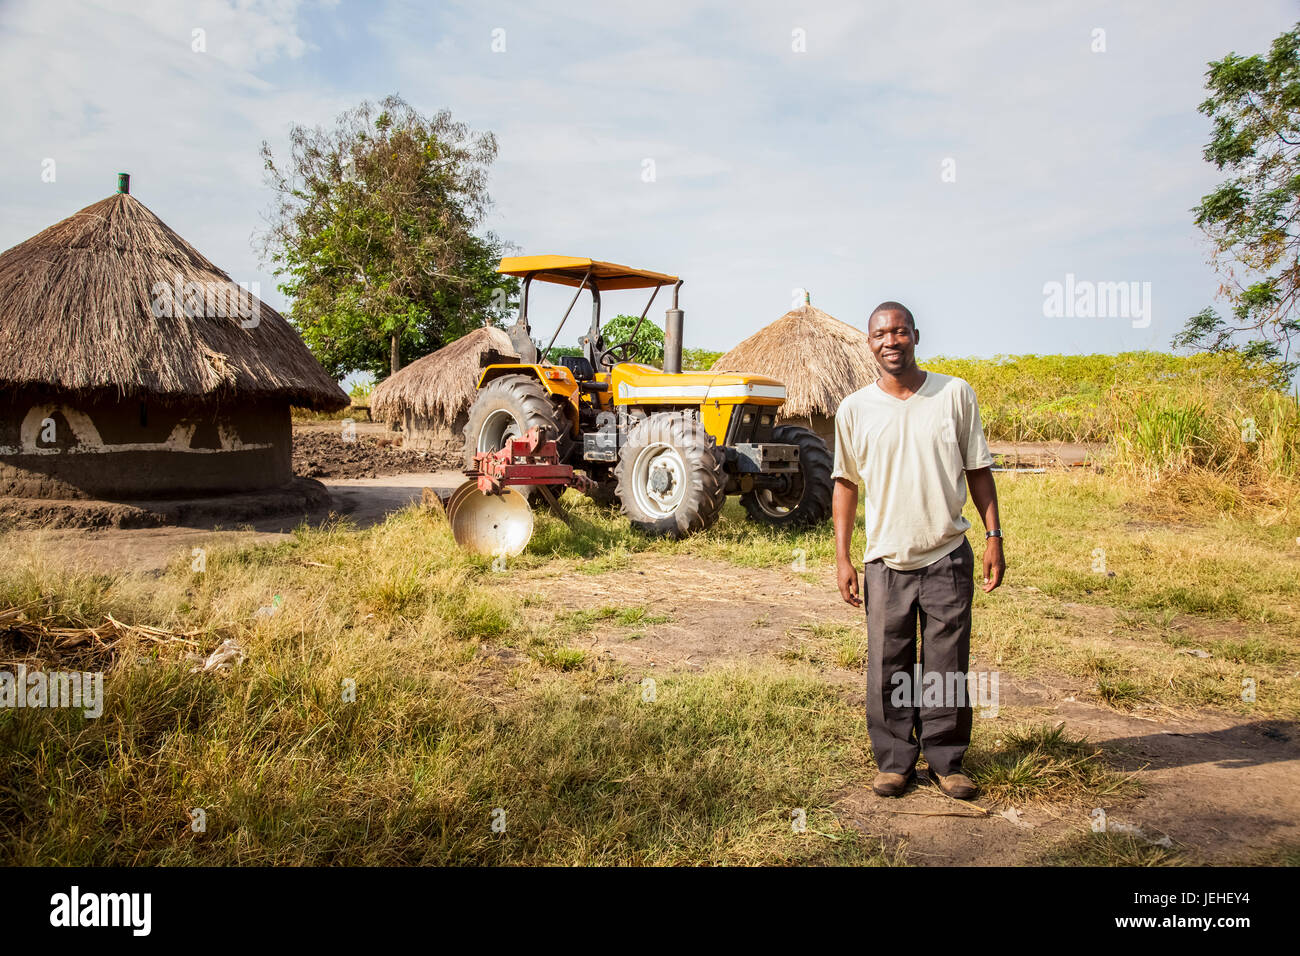 A man stands posing with a tractor and hut in the background; Uganda Stock Photo